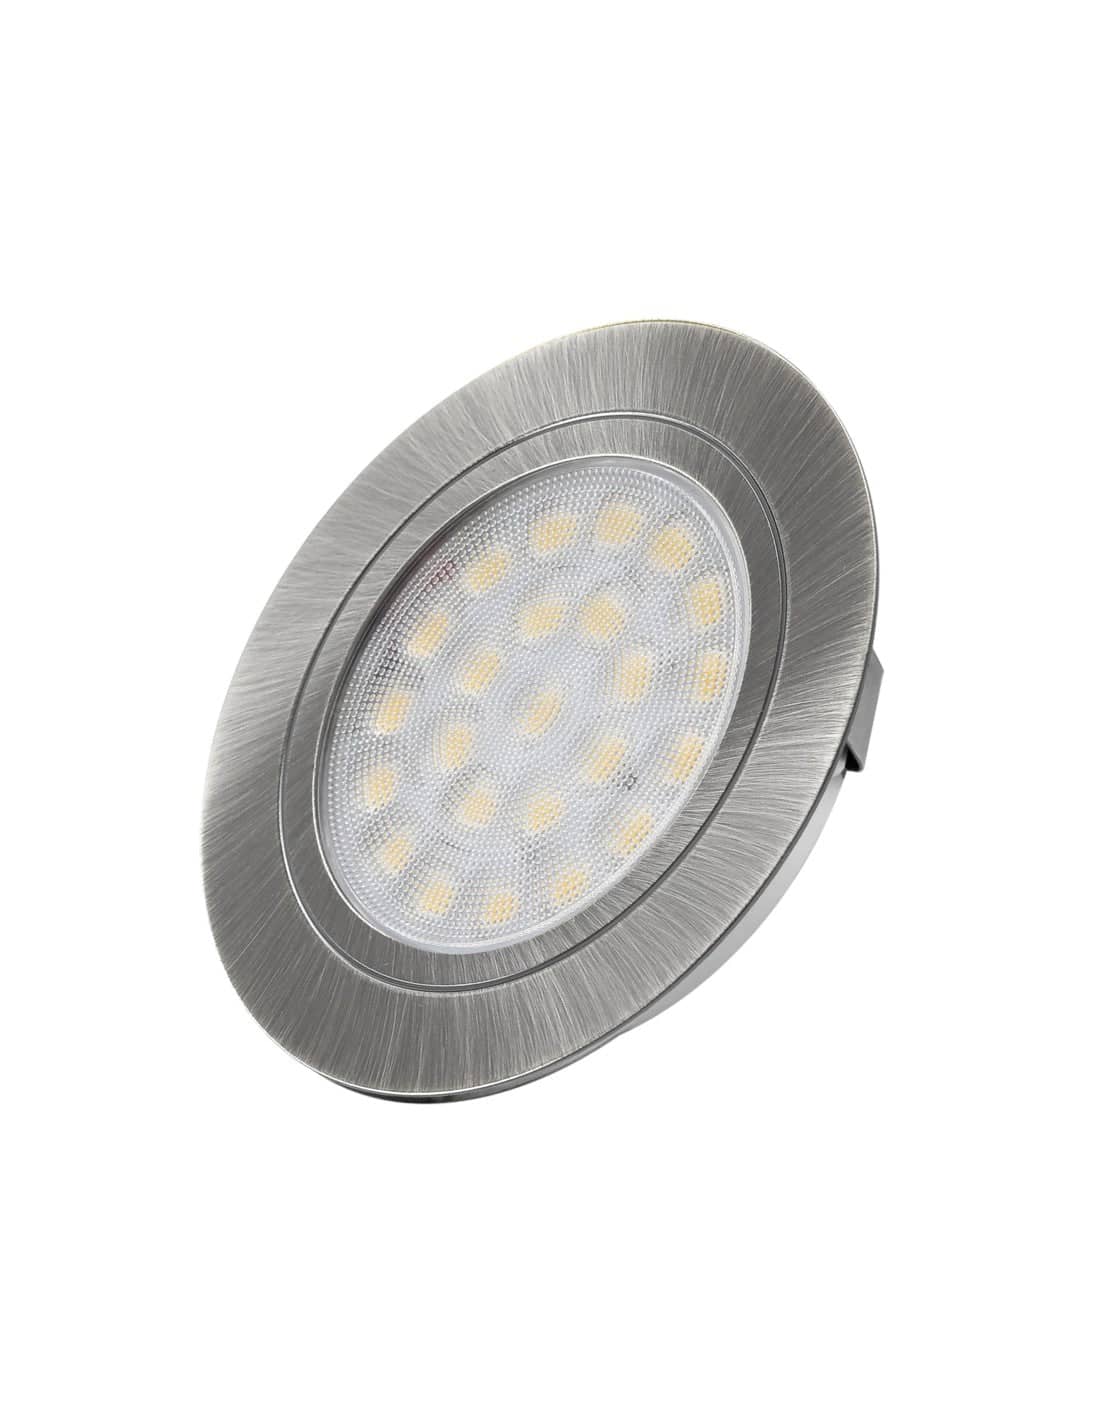 Oval Recessed Mount - Brushed Steel Warm White 30K   OVAL-2W-SD-30K-01